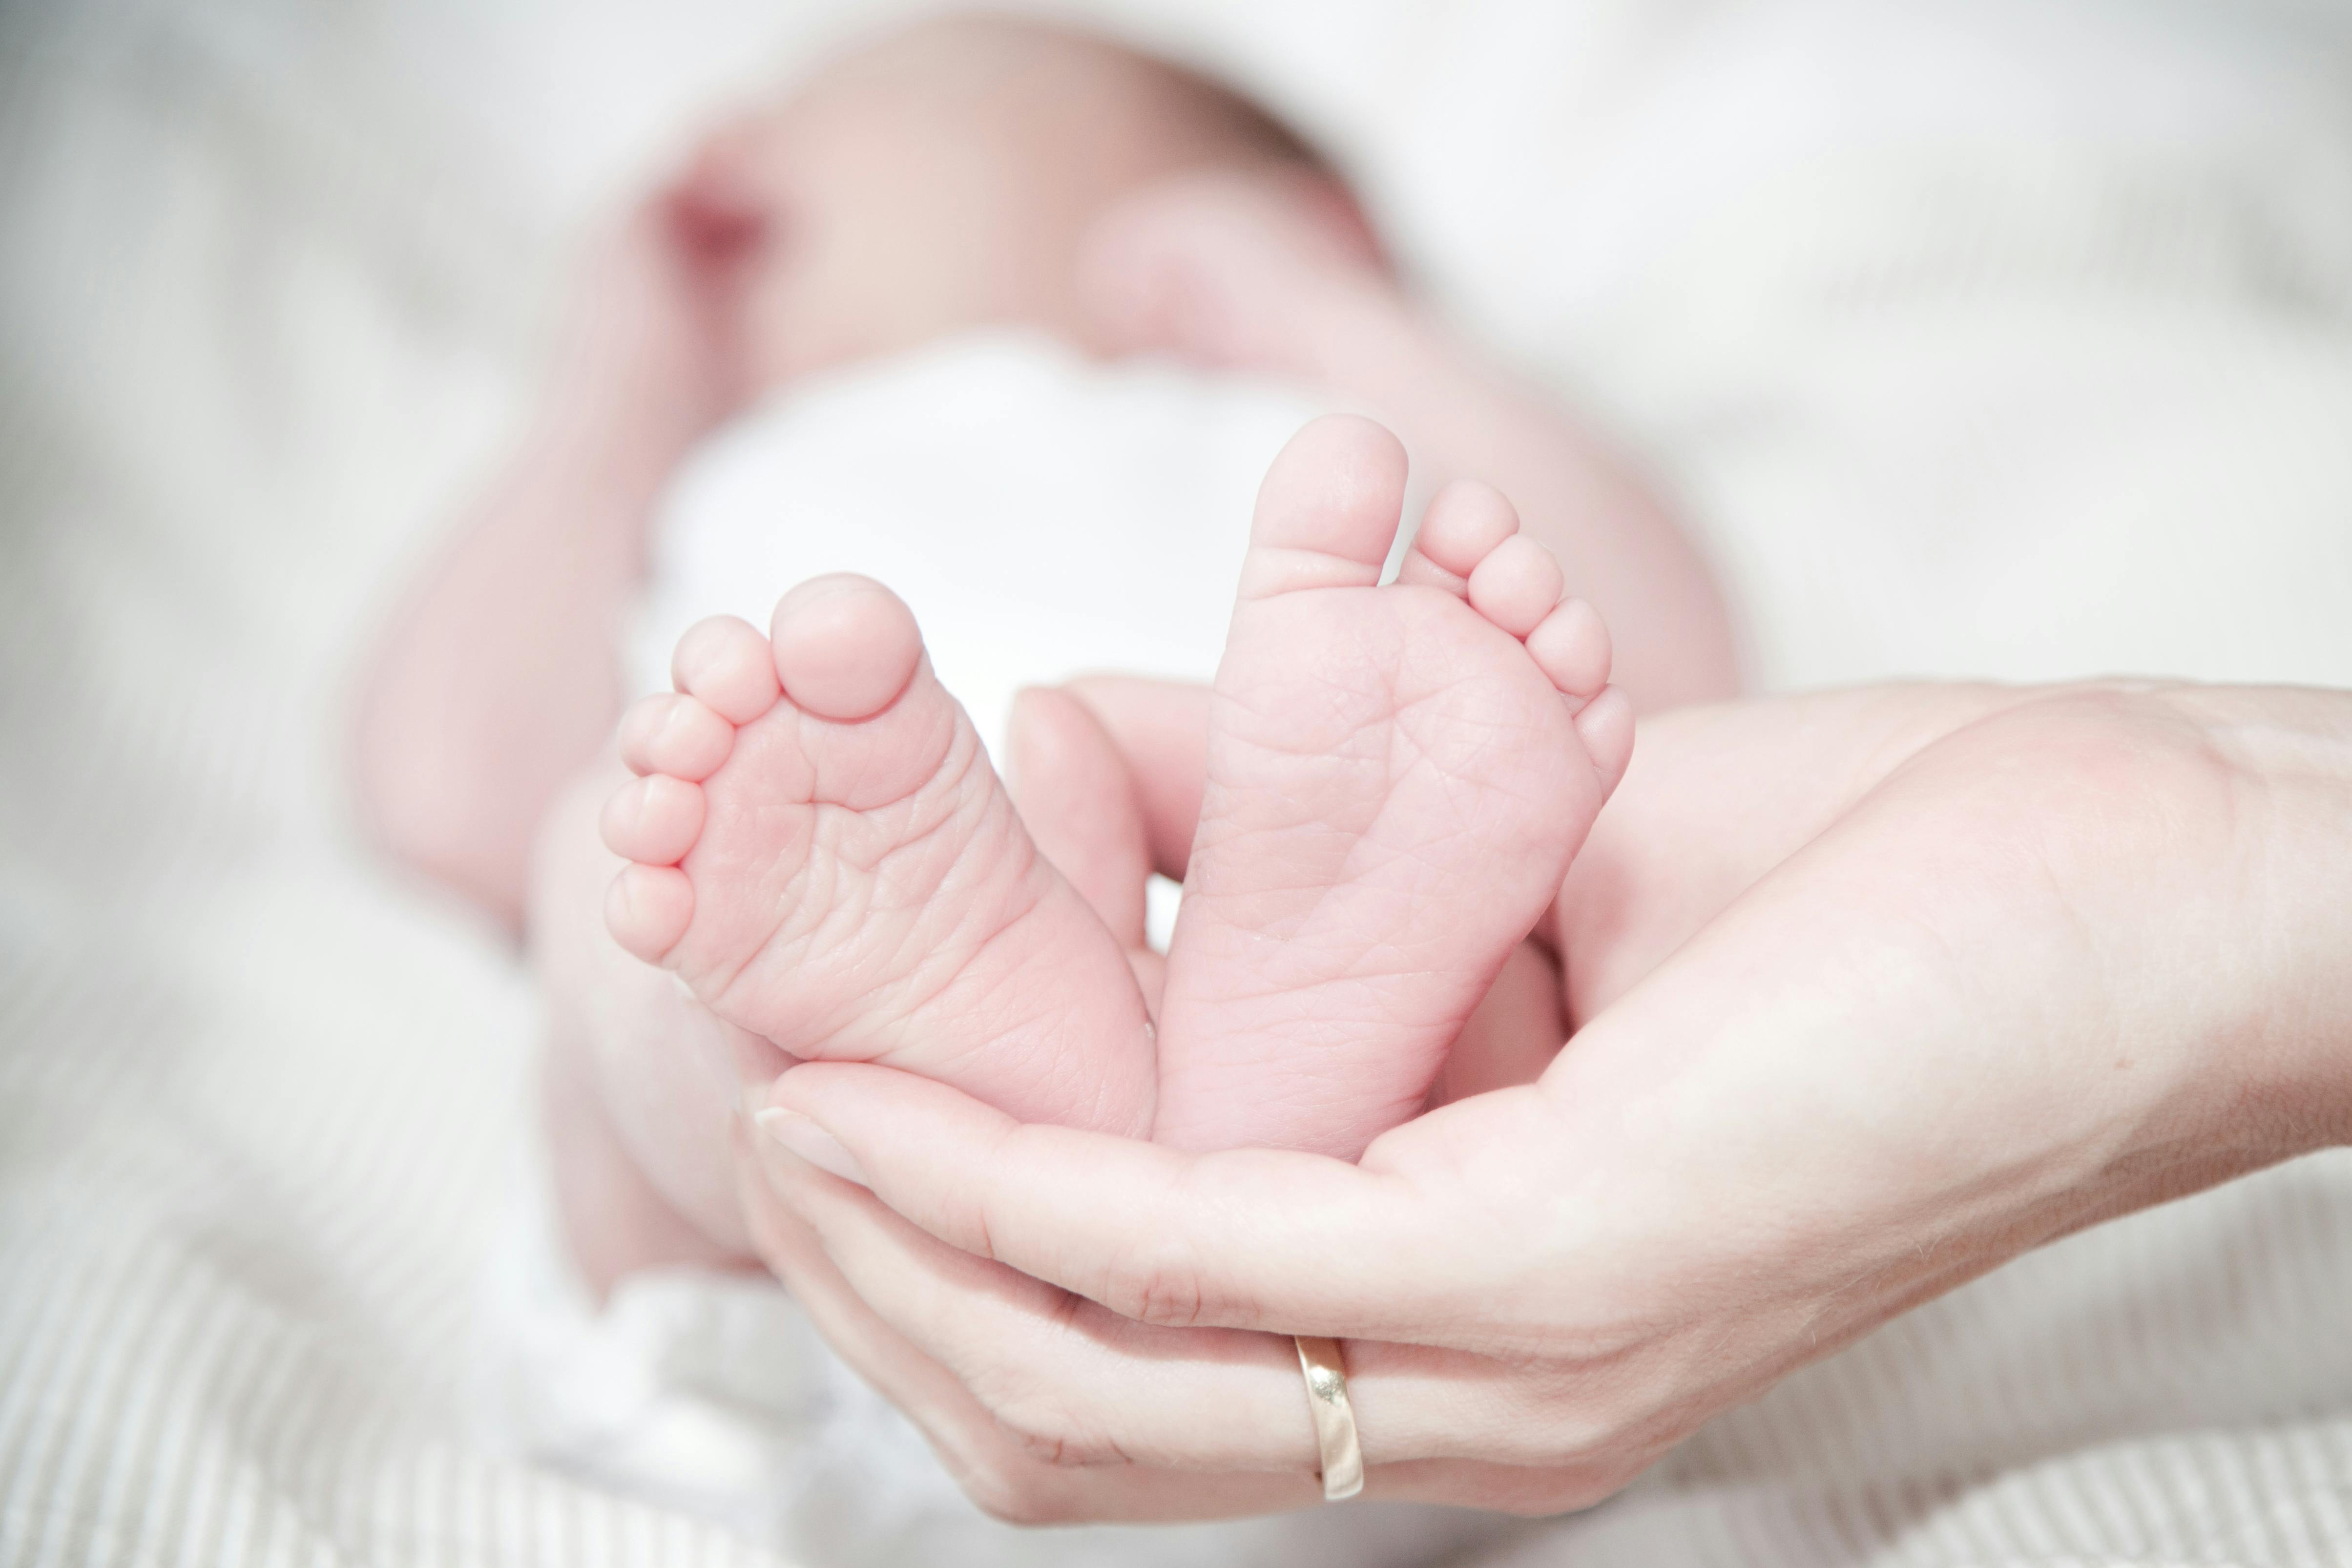 A hand holding a baby's feet | Source: Pexels